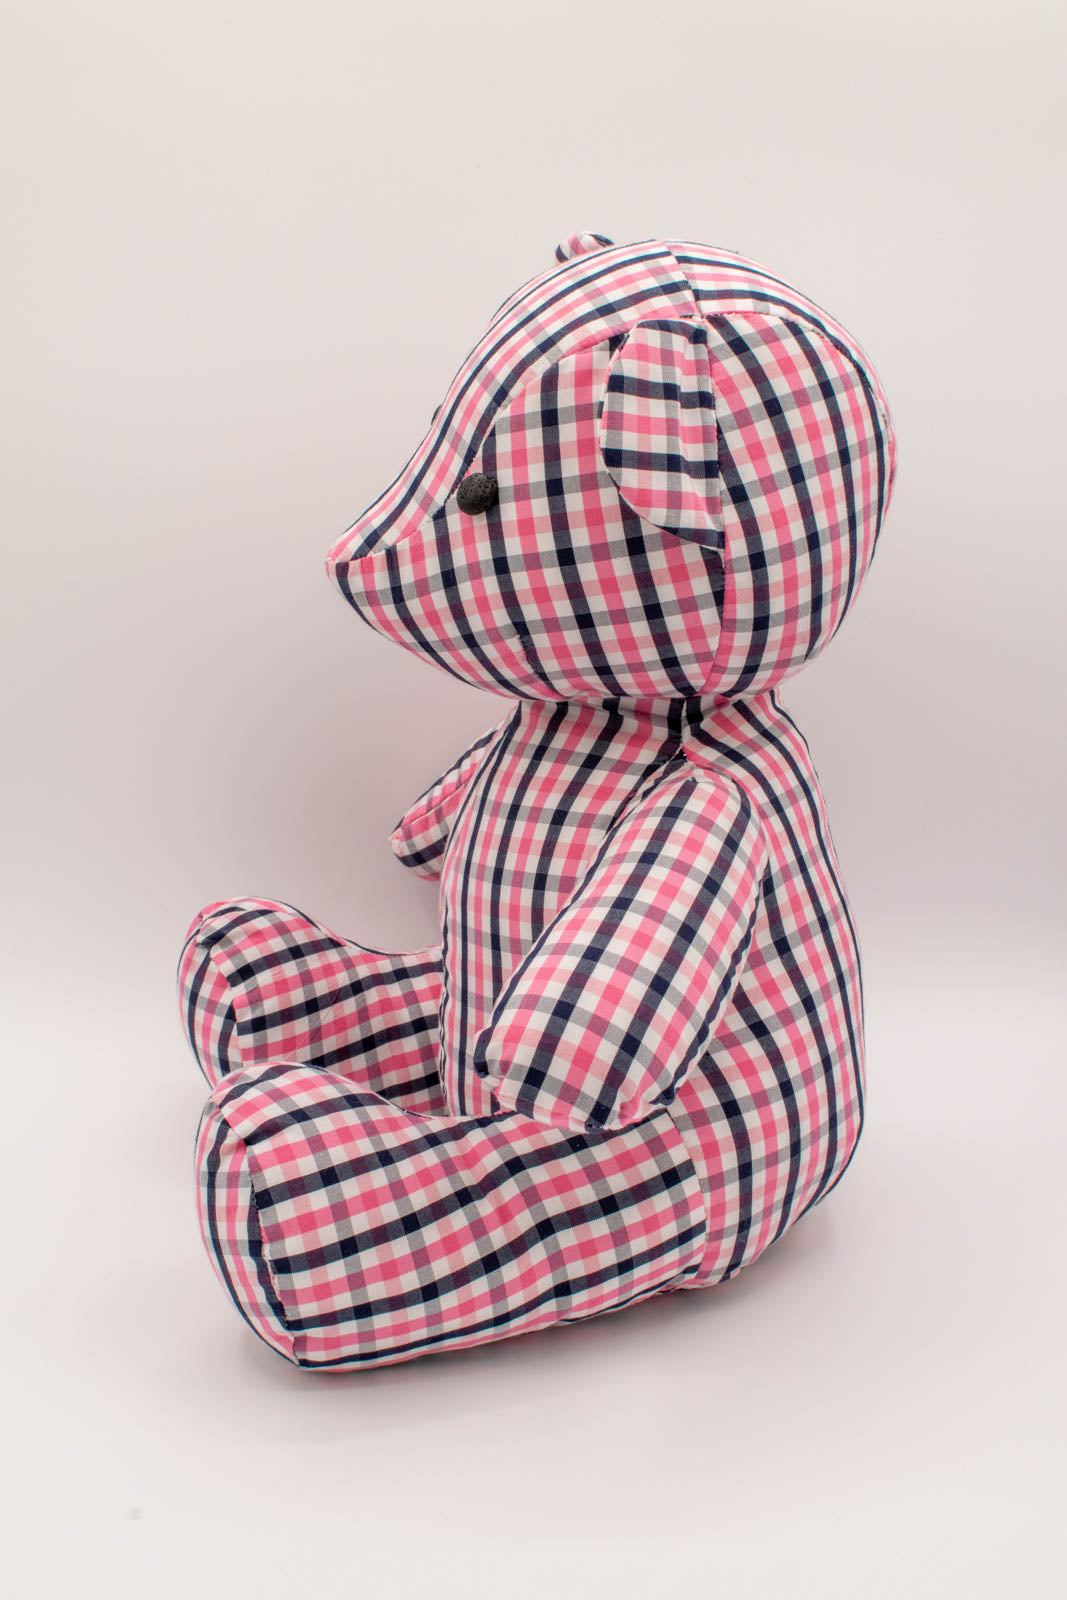 Blue and Pink Gingham Shirt Teddy Bear 4